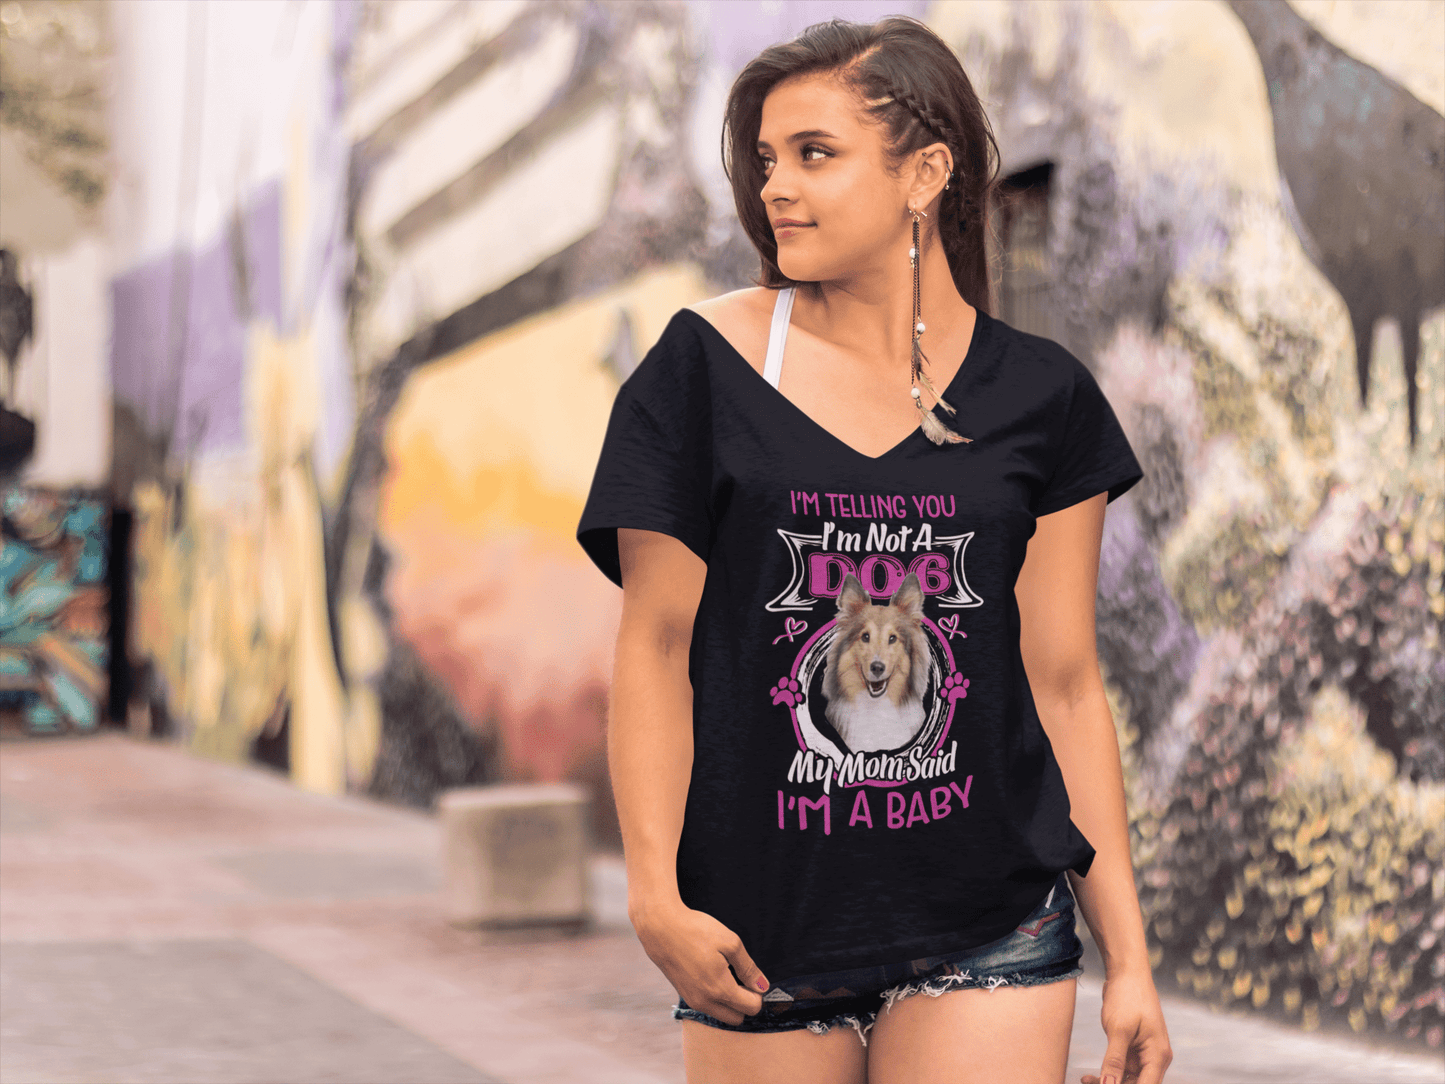 ULTRABASIC Women's T-Shirt I'm Telling You I'm Not a Rough Collie - My Mom Said I'm a Baby - Cute Puppy Dog Lover Tee Shirt